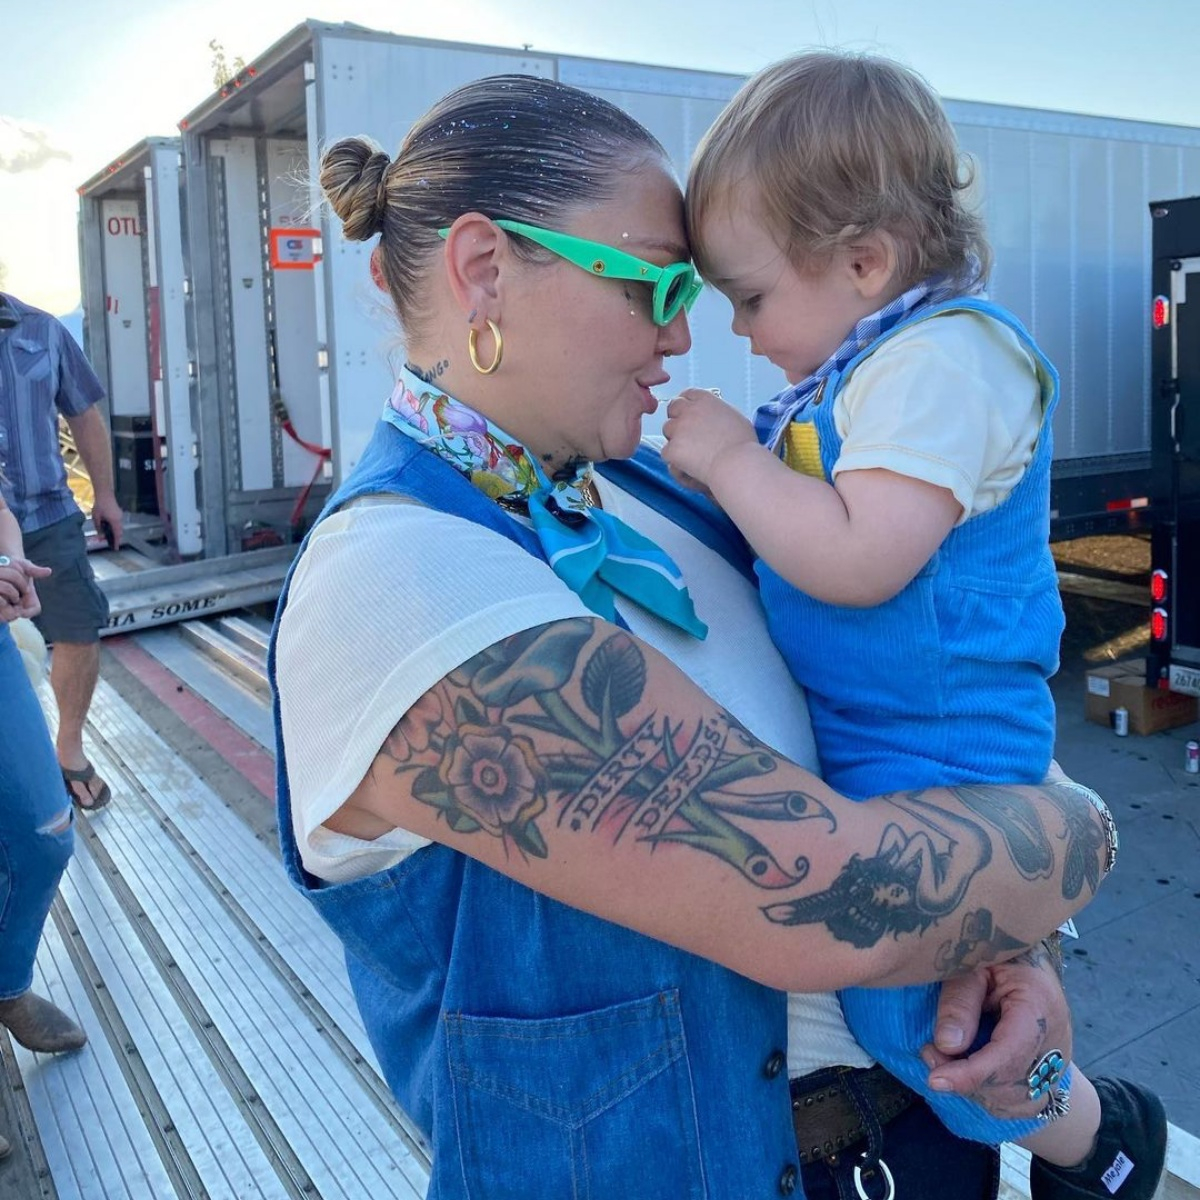 Elle King Shares How Motherhood “Softened” Her On and Off Stage